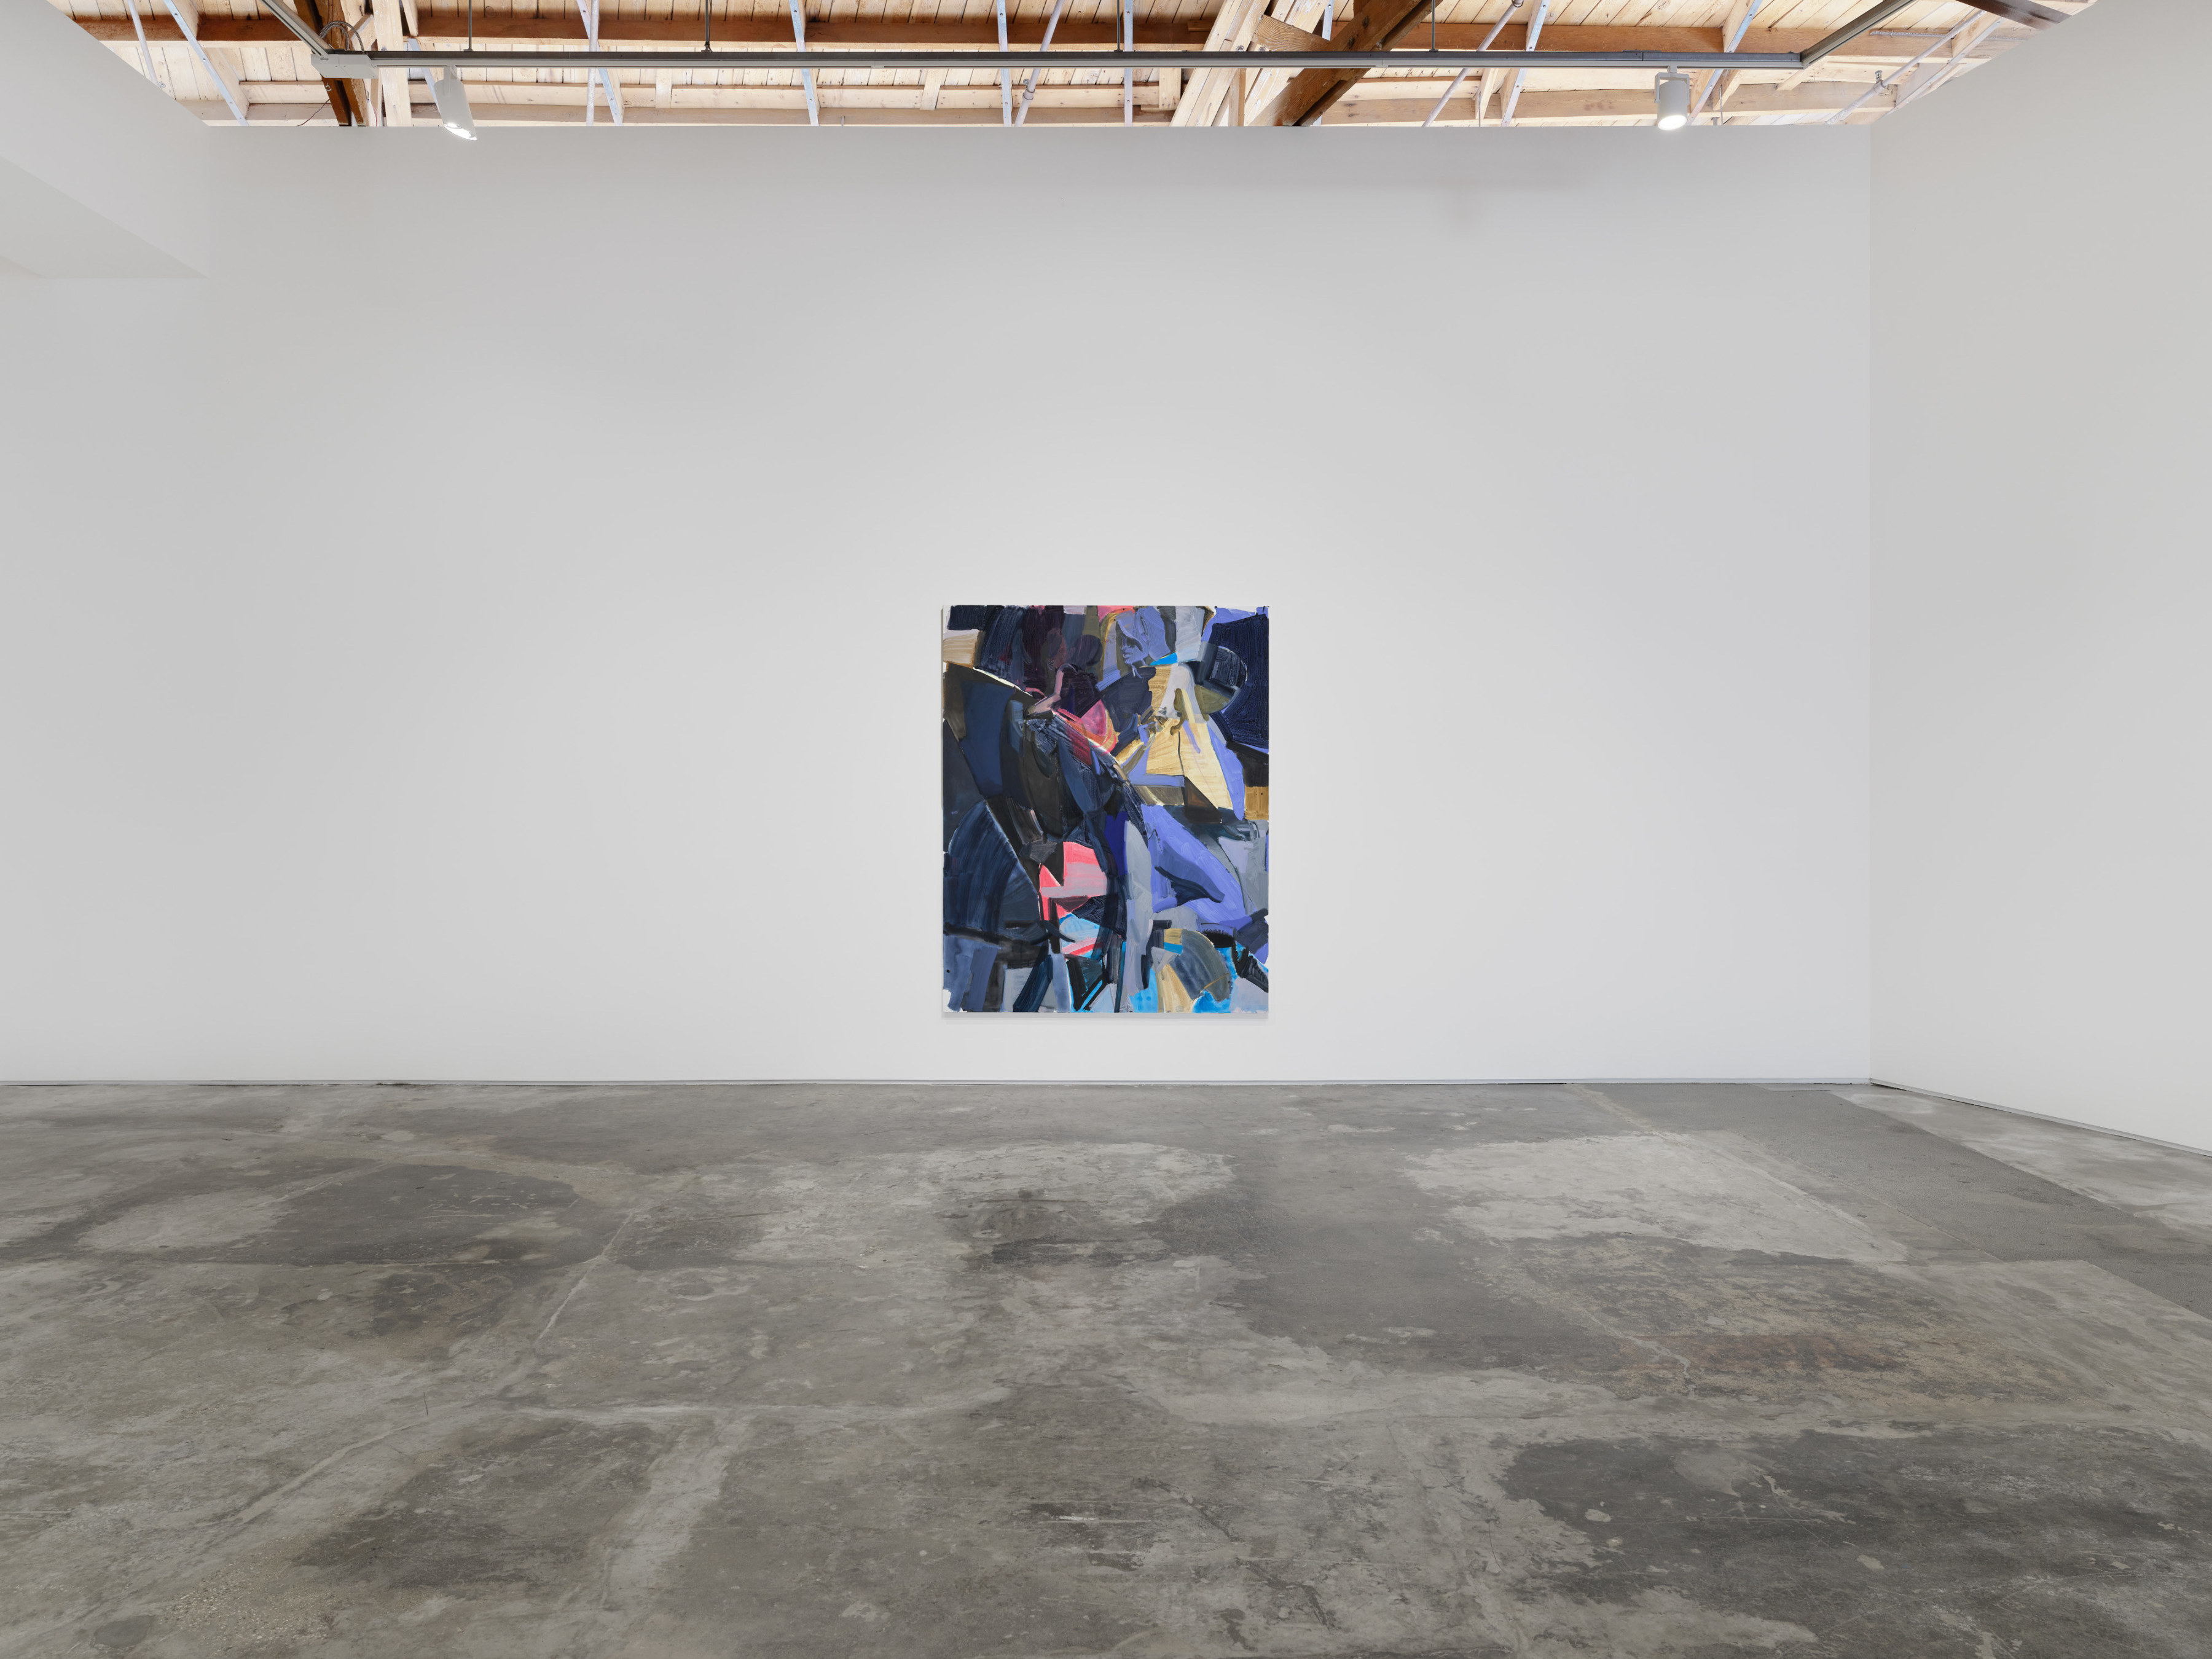 Installation view of Sarah Awad's exhibition "To Hold a Thing" at Night Gallery